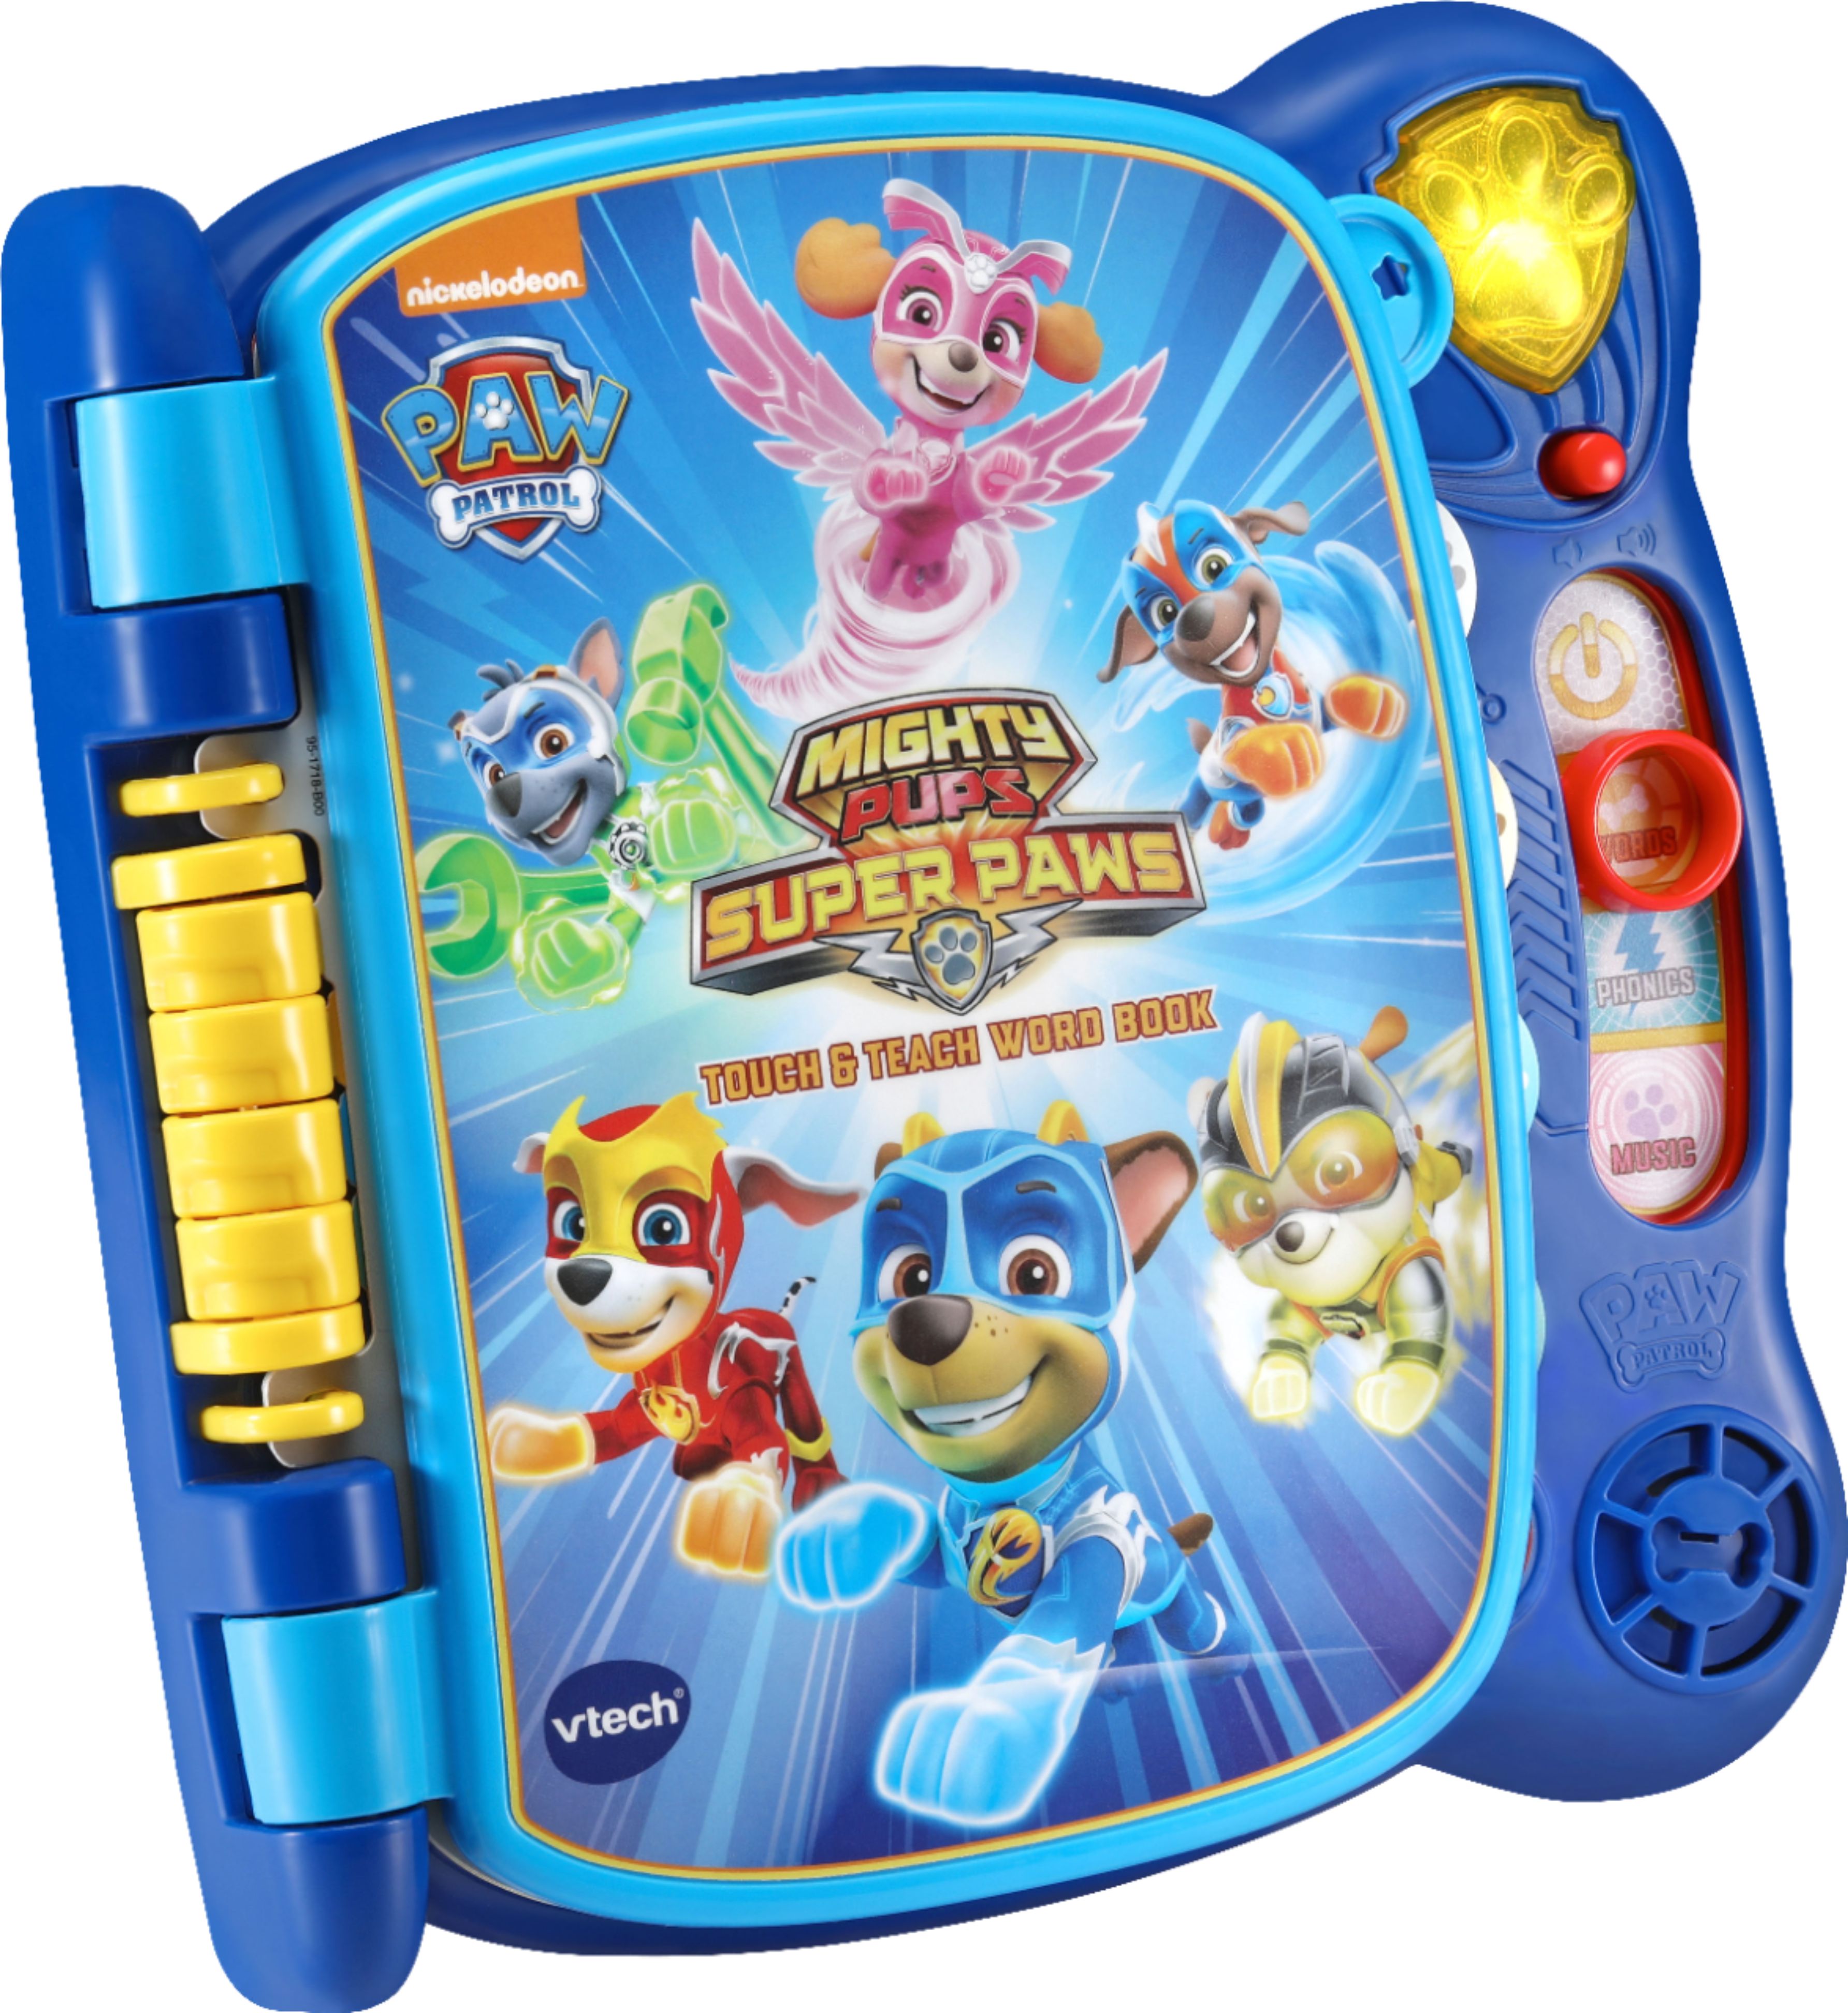 Angle View: VTech - PAW Patrol Mighty Pups Touch & Teach Word Book - Multicolor